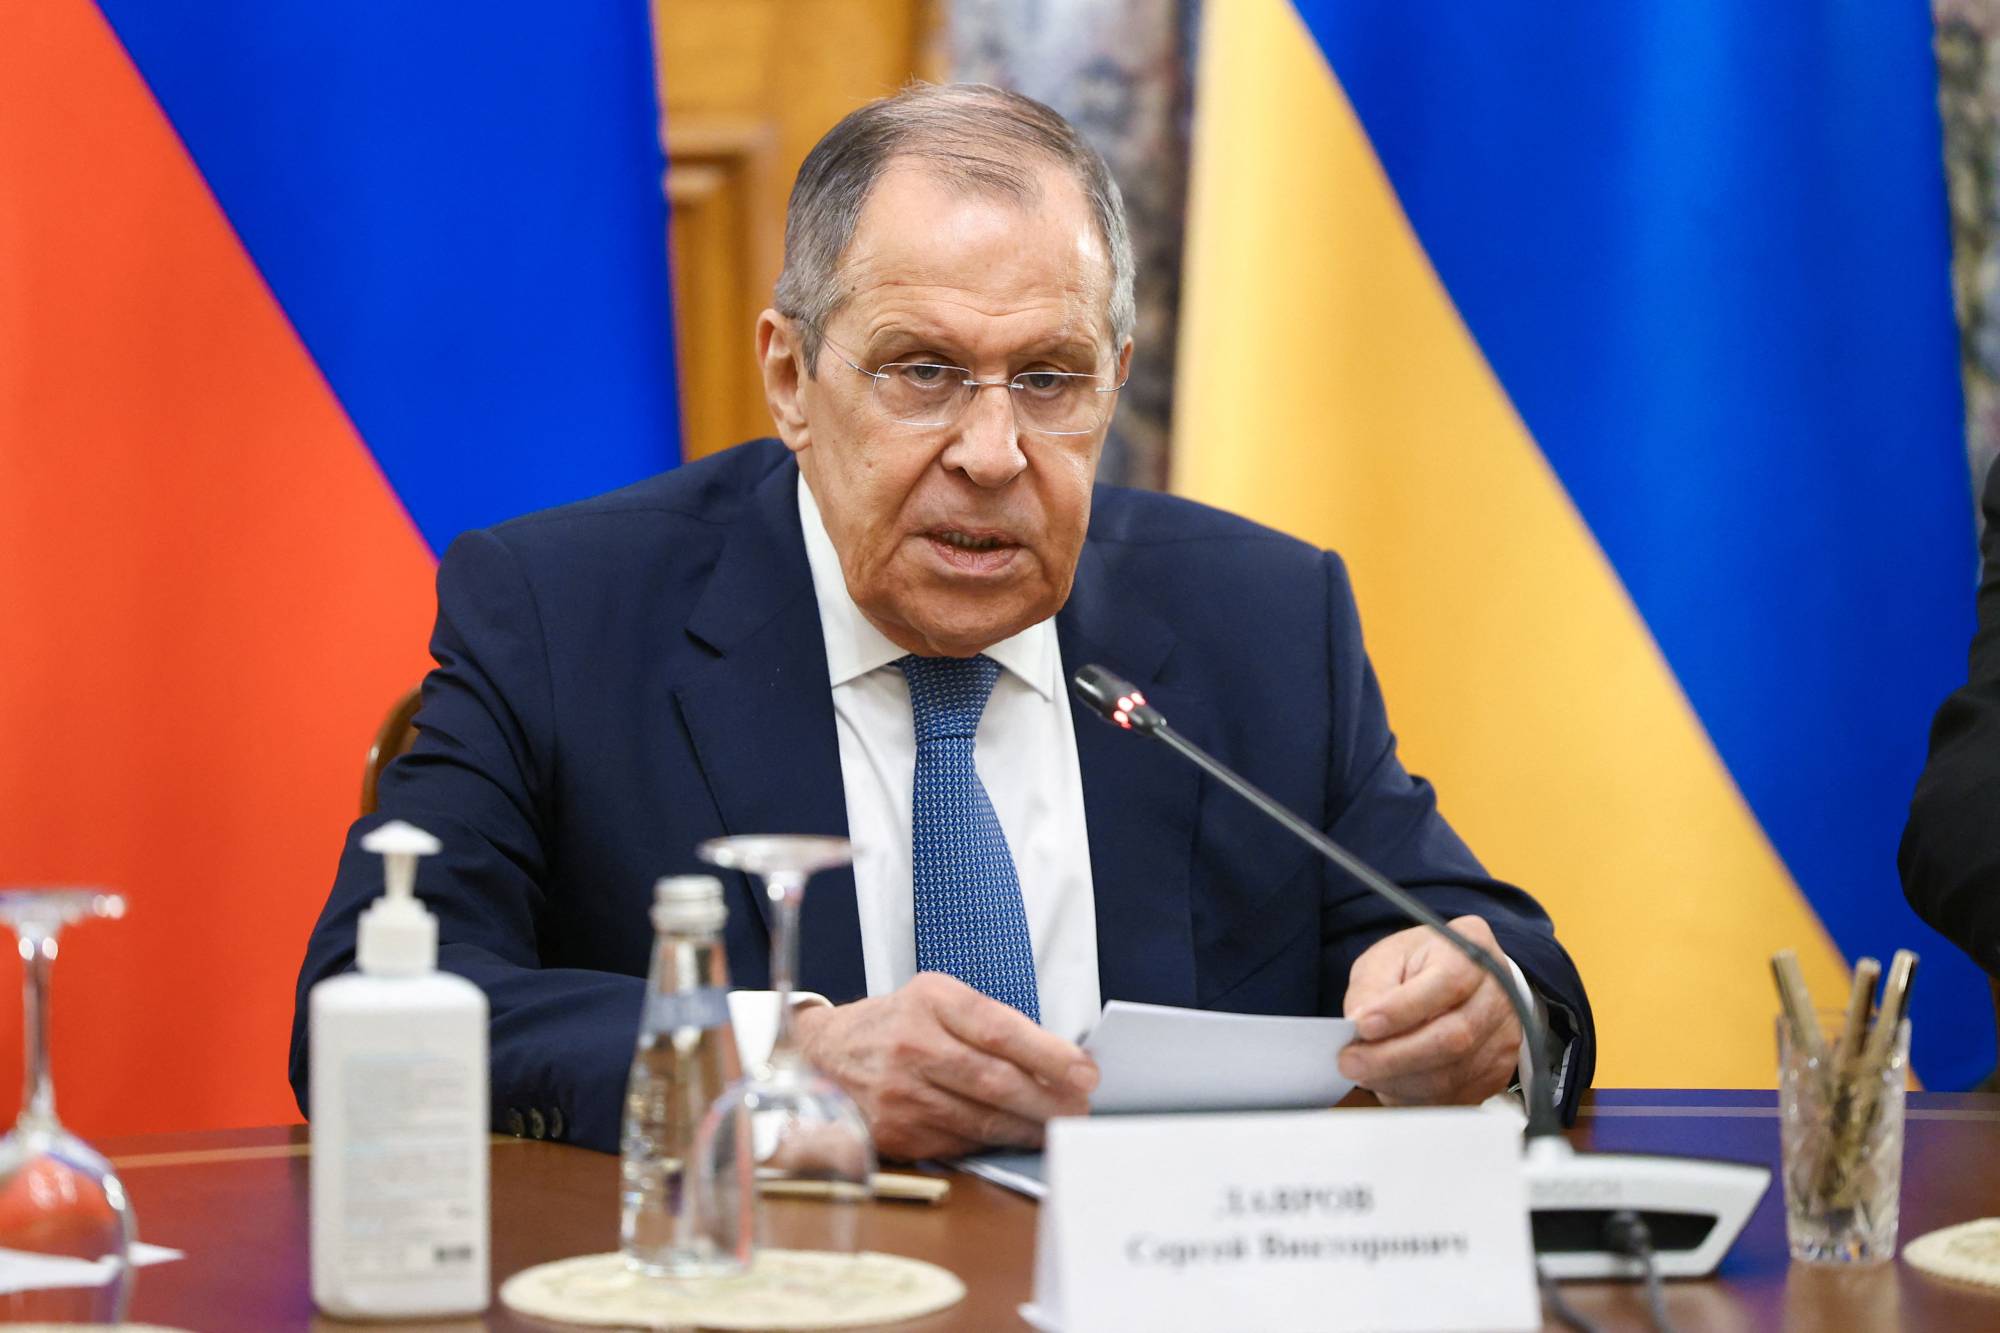 Russian Foreign Minister Sergey Lavrov reads from a prepared statement during a televised news conference Saturday | RUSSIAN FOREIGN MINISTRY / VIA REUTERS